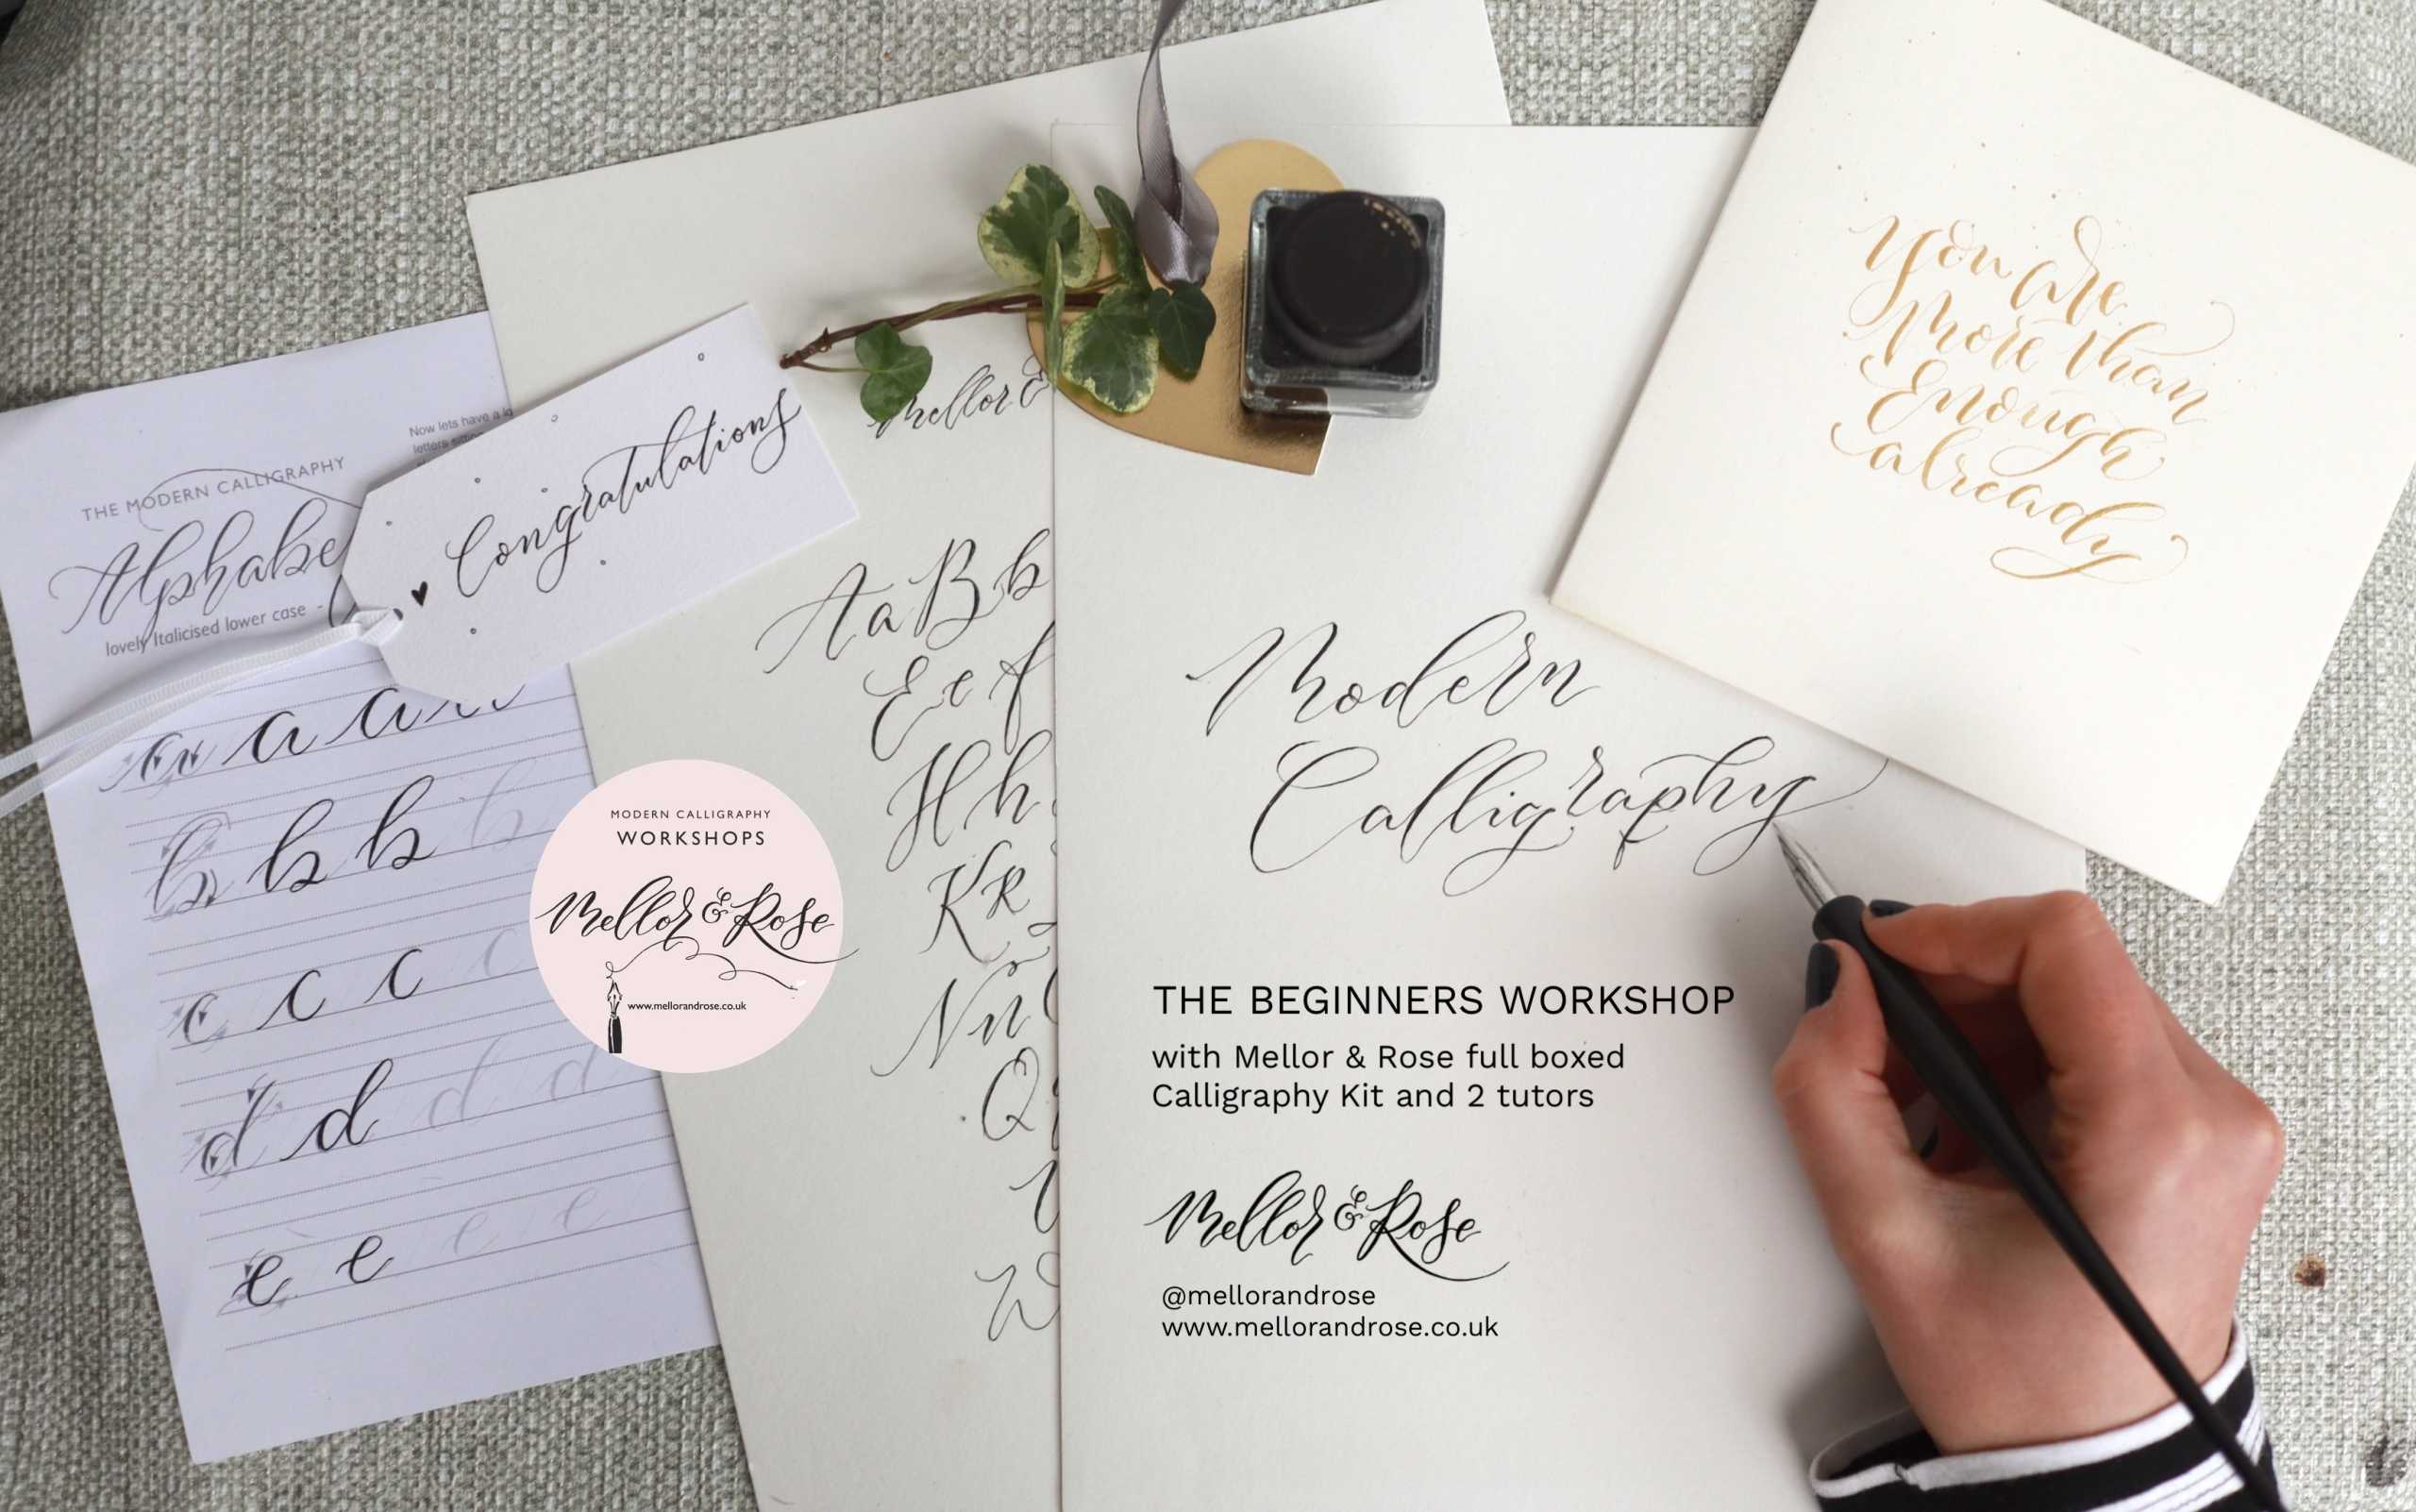 Mellor & Rose Modern Calligraphy Workshop at AW Interiors Bolton, Greater Manchester